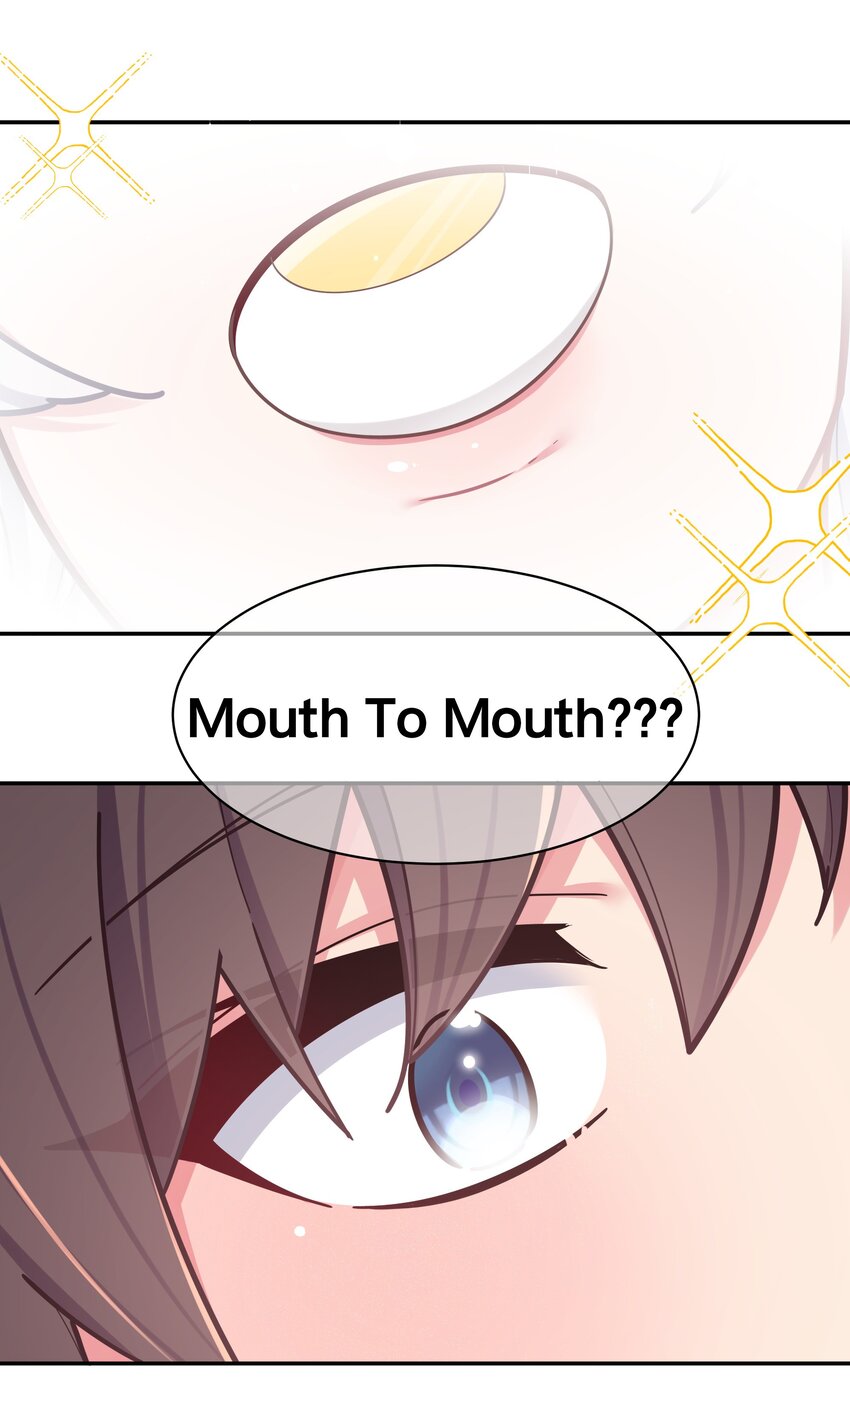 040 Mouth to mouth的投喂方式？！46